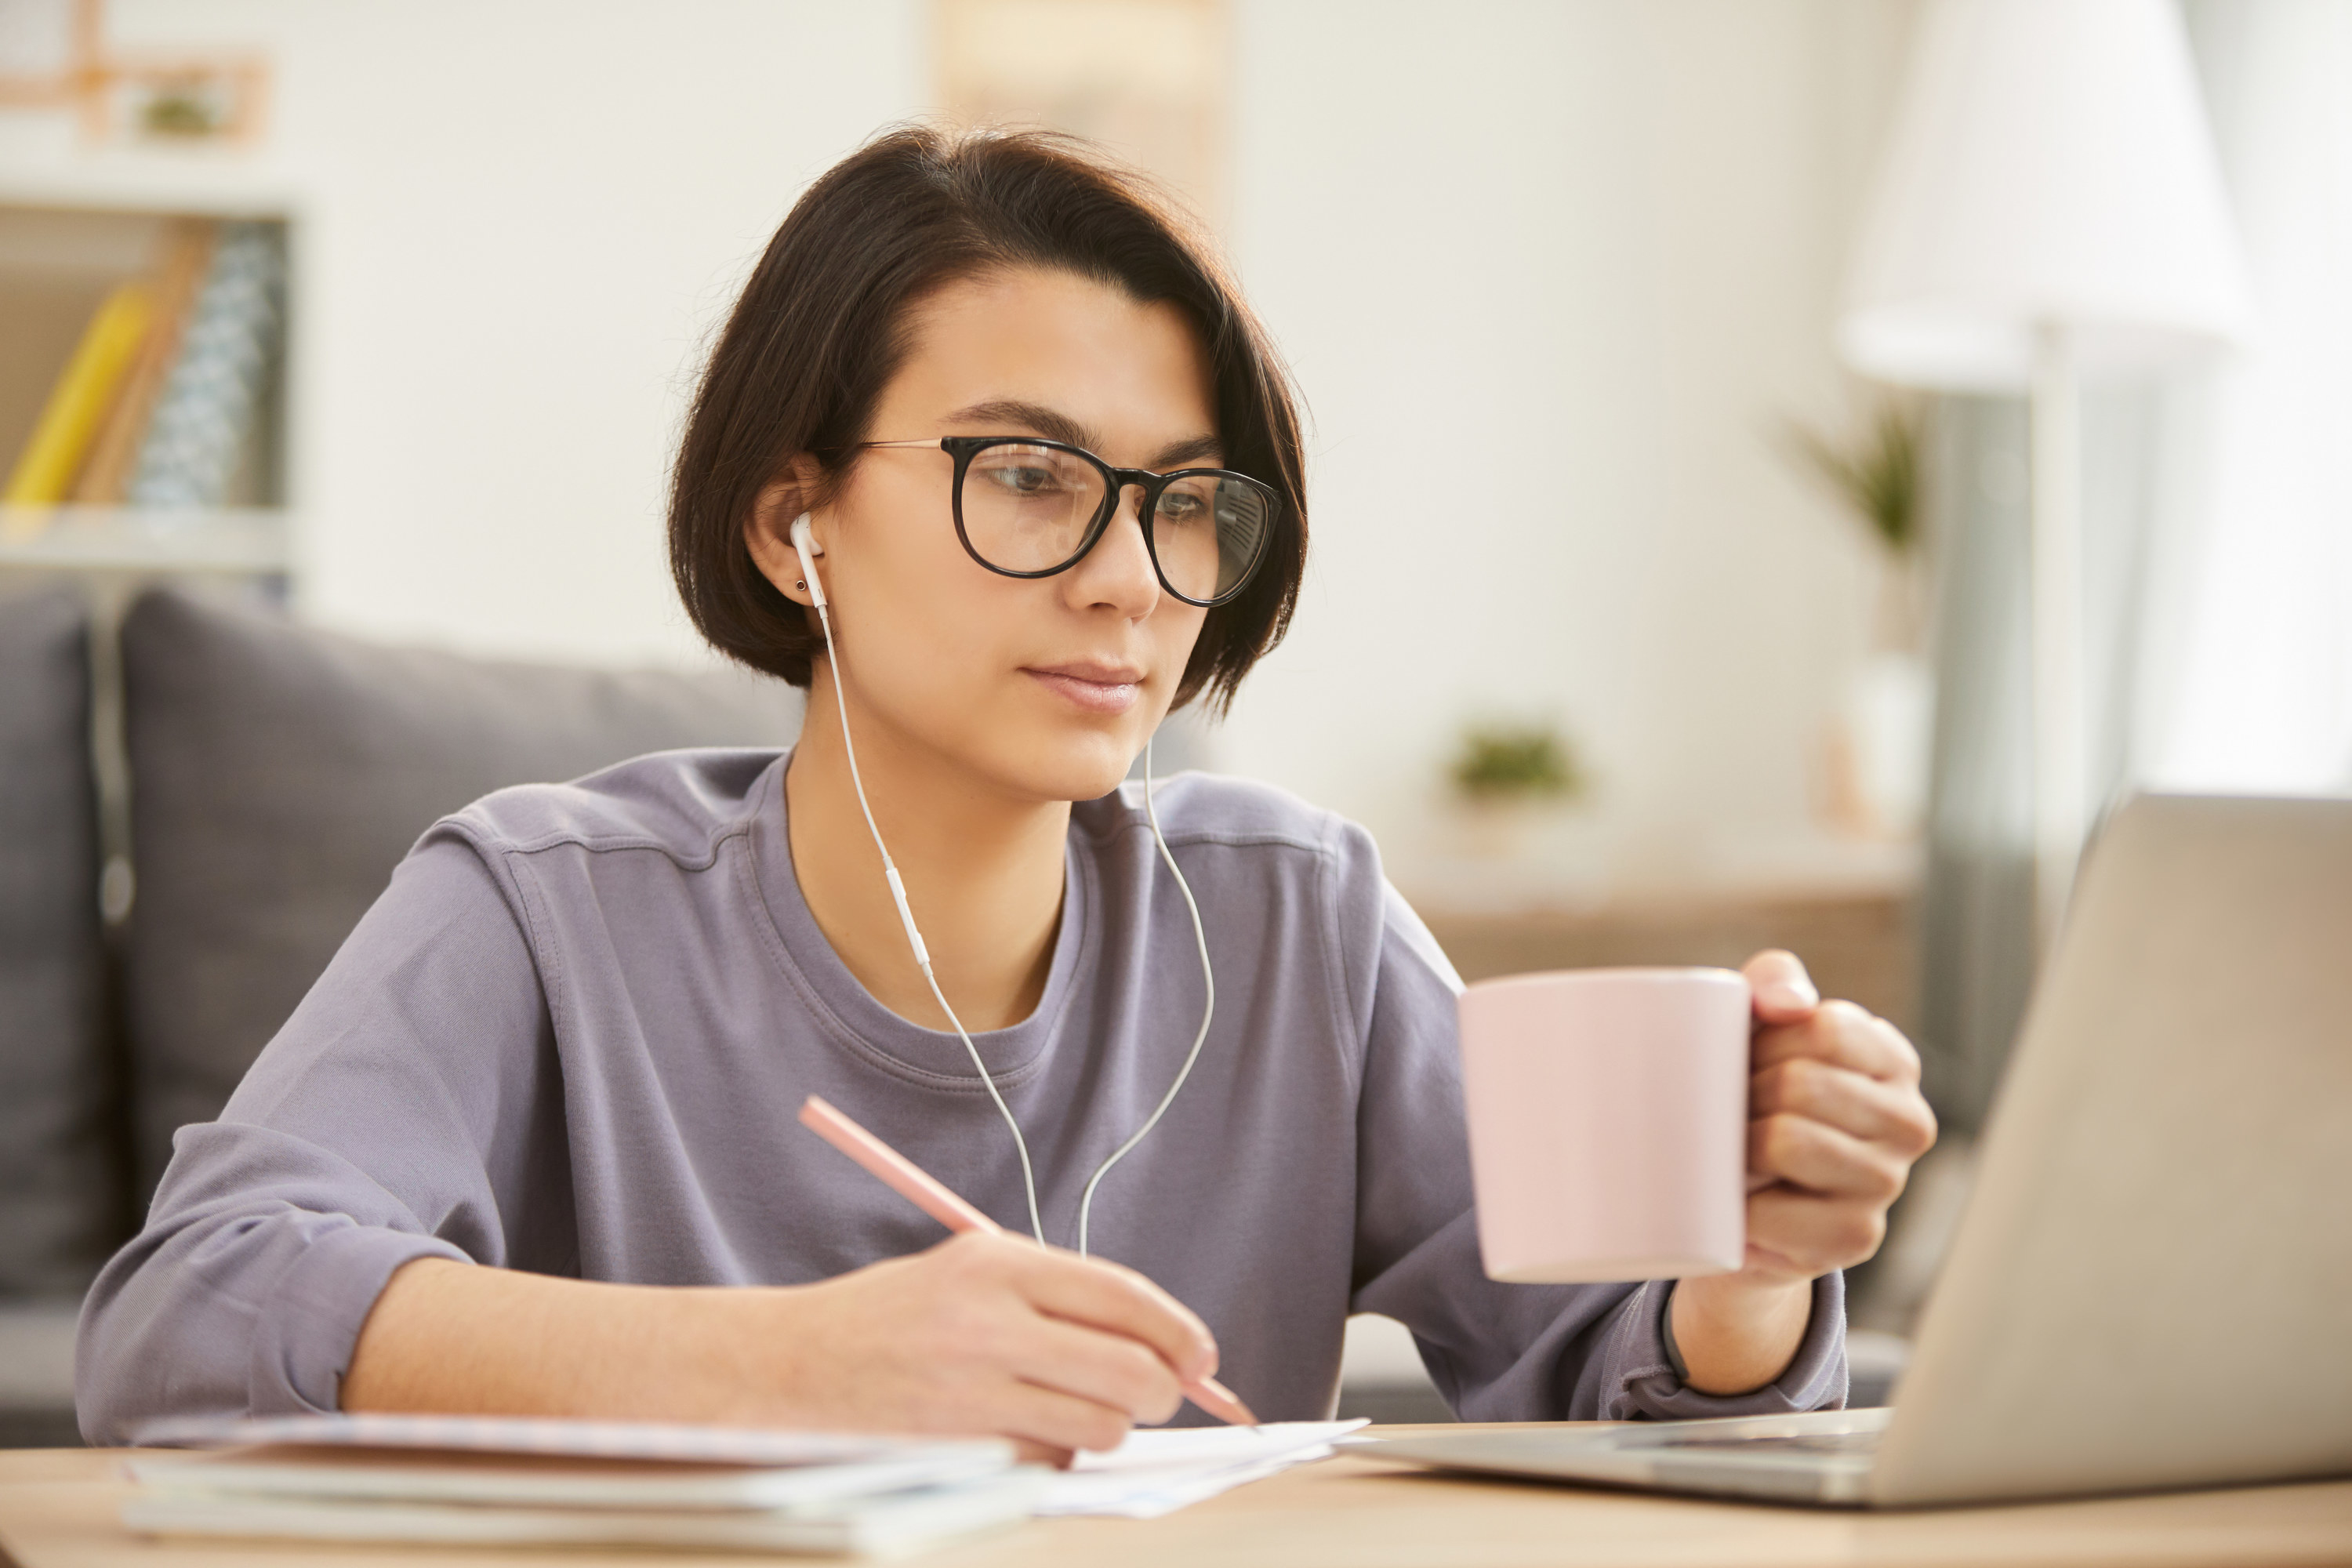 Woman with headphones and a pencil transcribes information